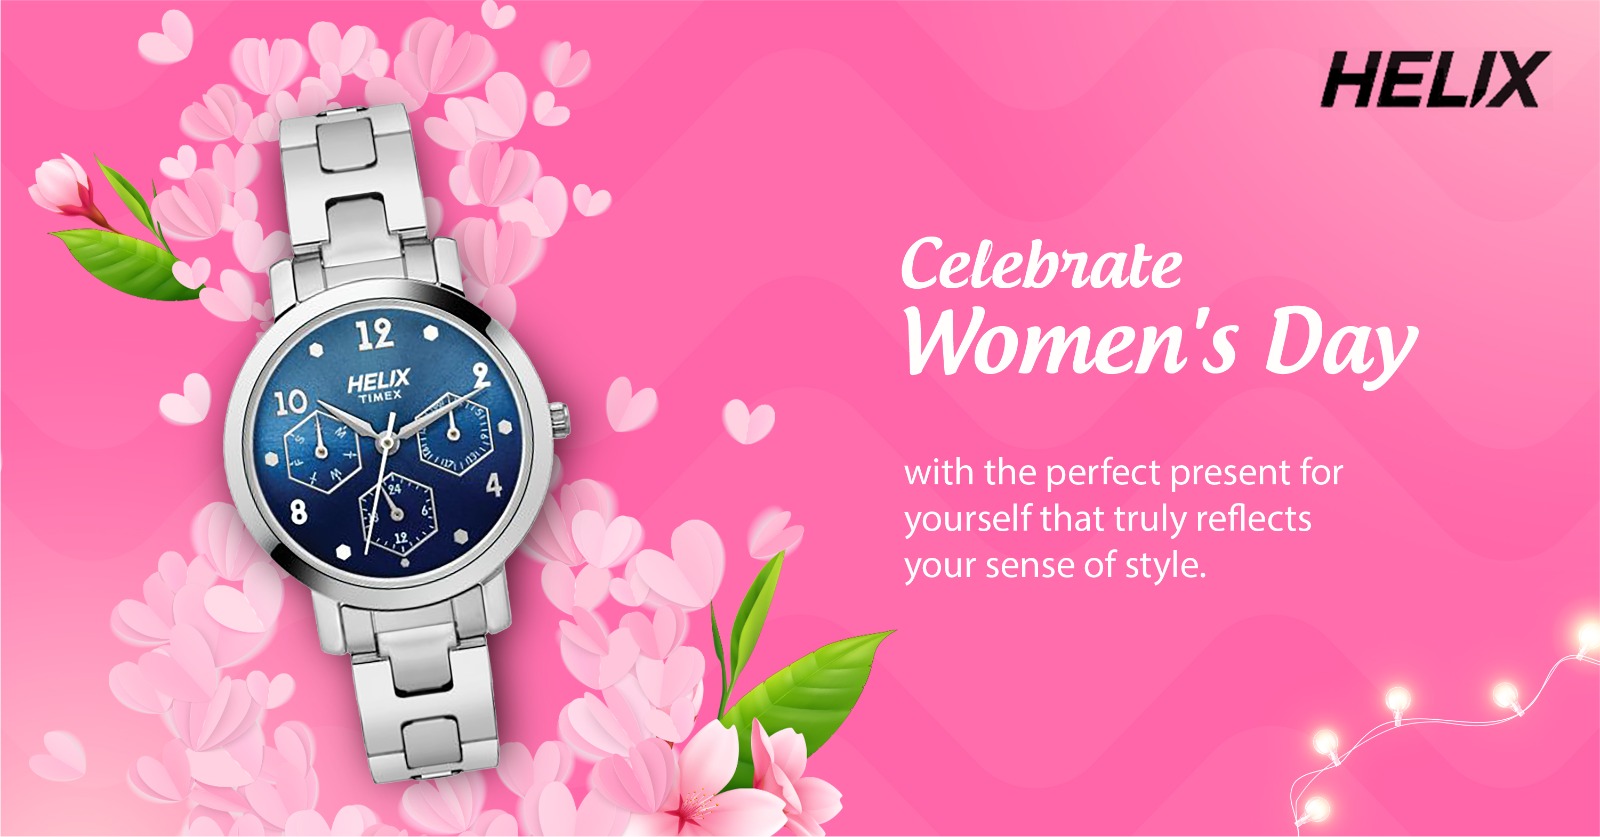 Celebrate Women's Day with the perfect present for yourself that truly reflects your sense of style. Discover the best collection today!